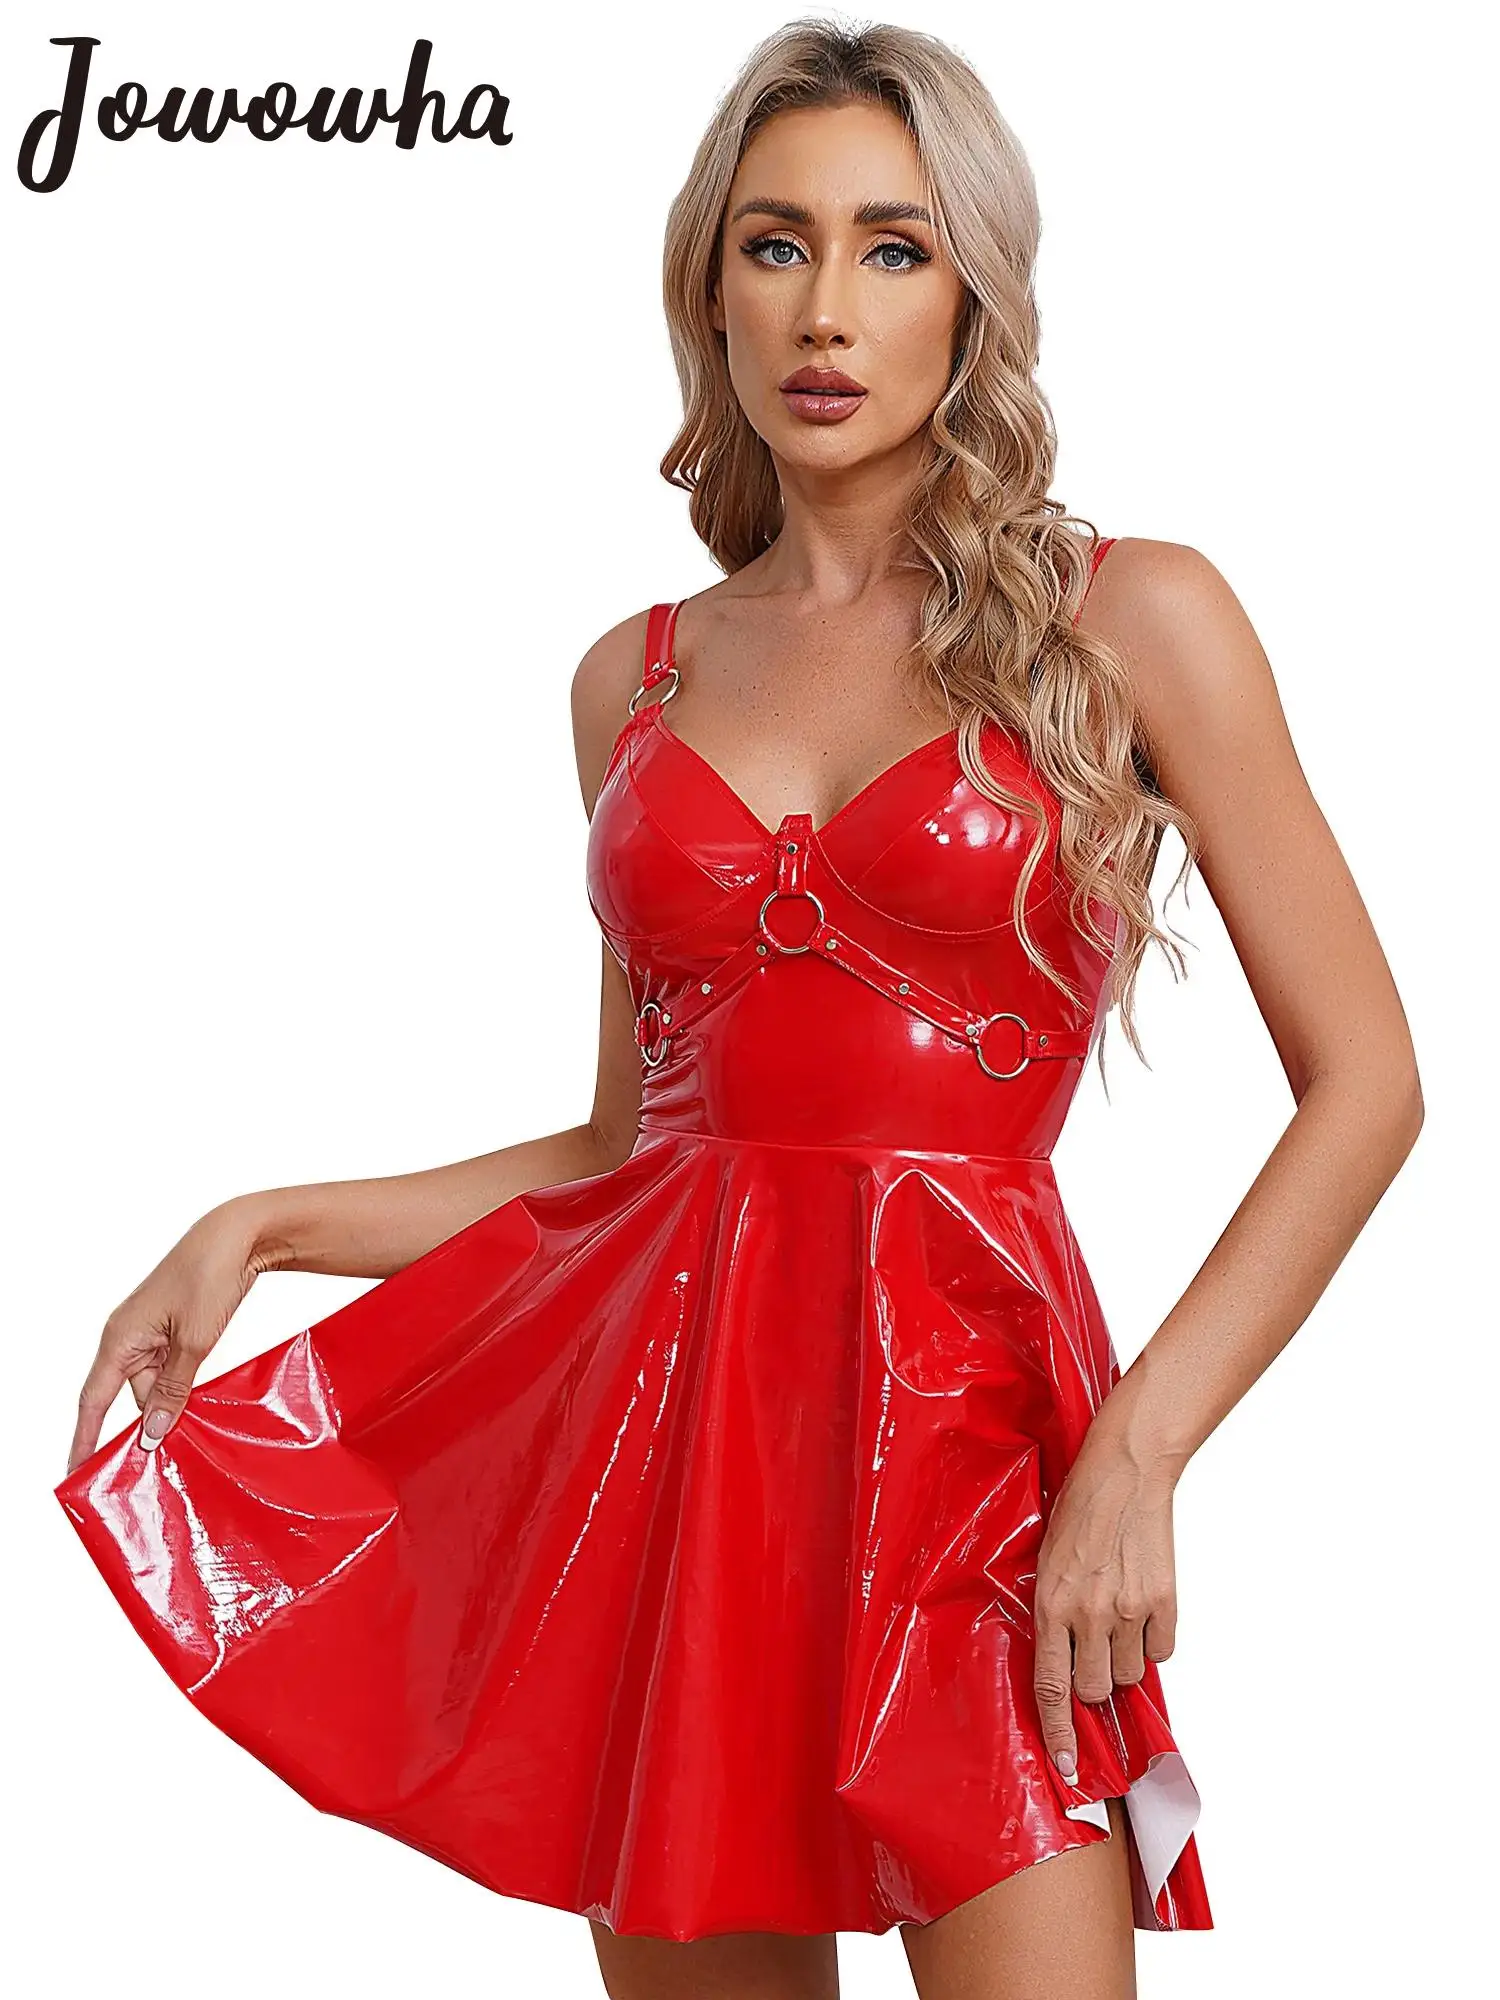 

Womens Wet Look Patent Leather Slip Dress O-Ring Rivets Strappy V Neck Gothic Punk A-Line Mini Dresses Rave Theme Party Clubwear